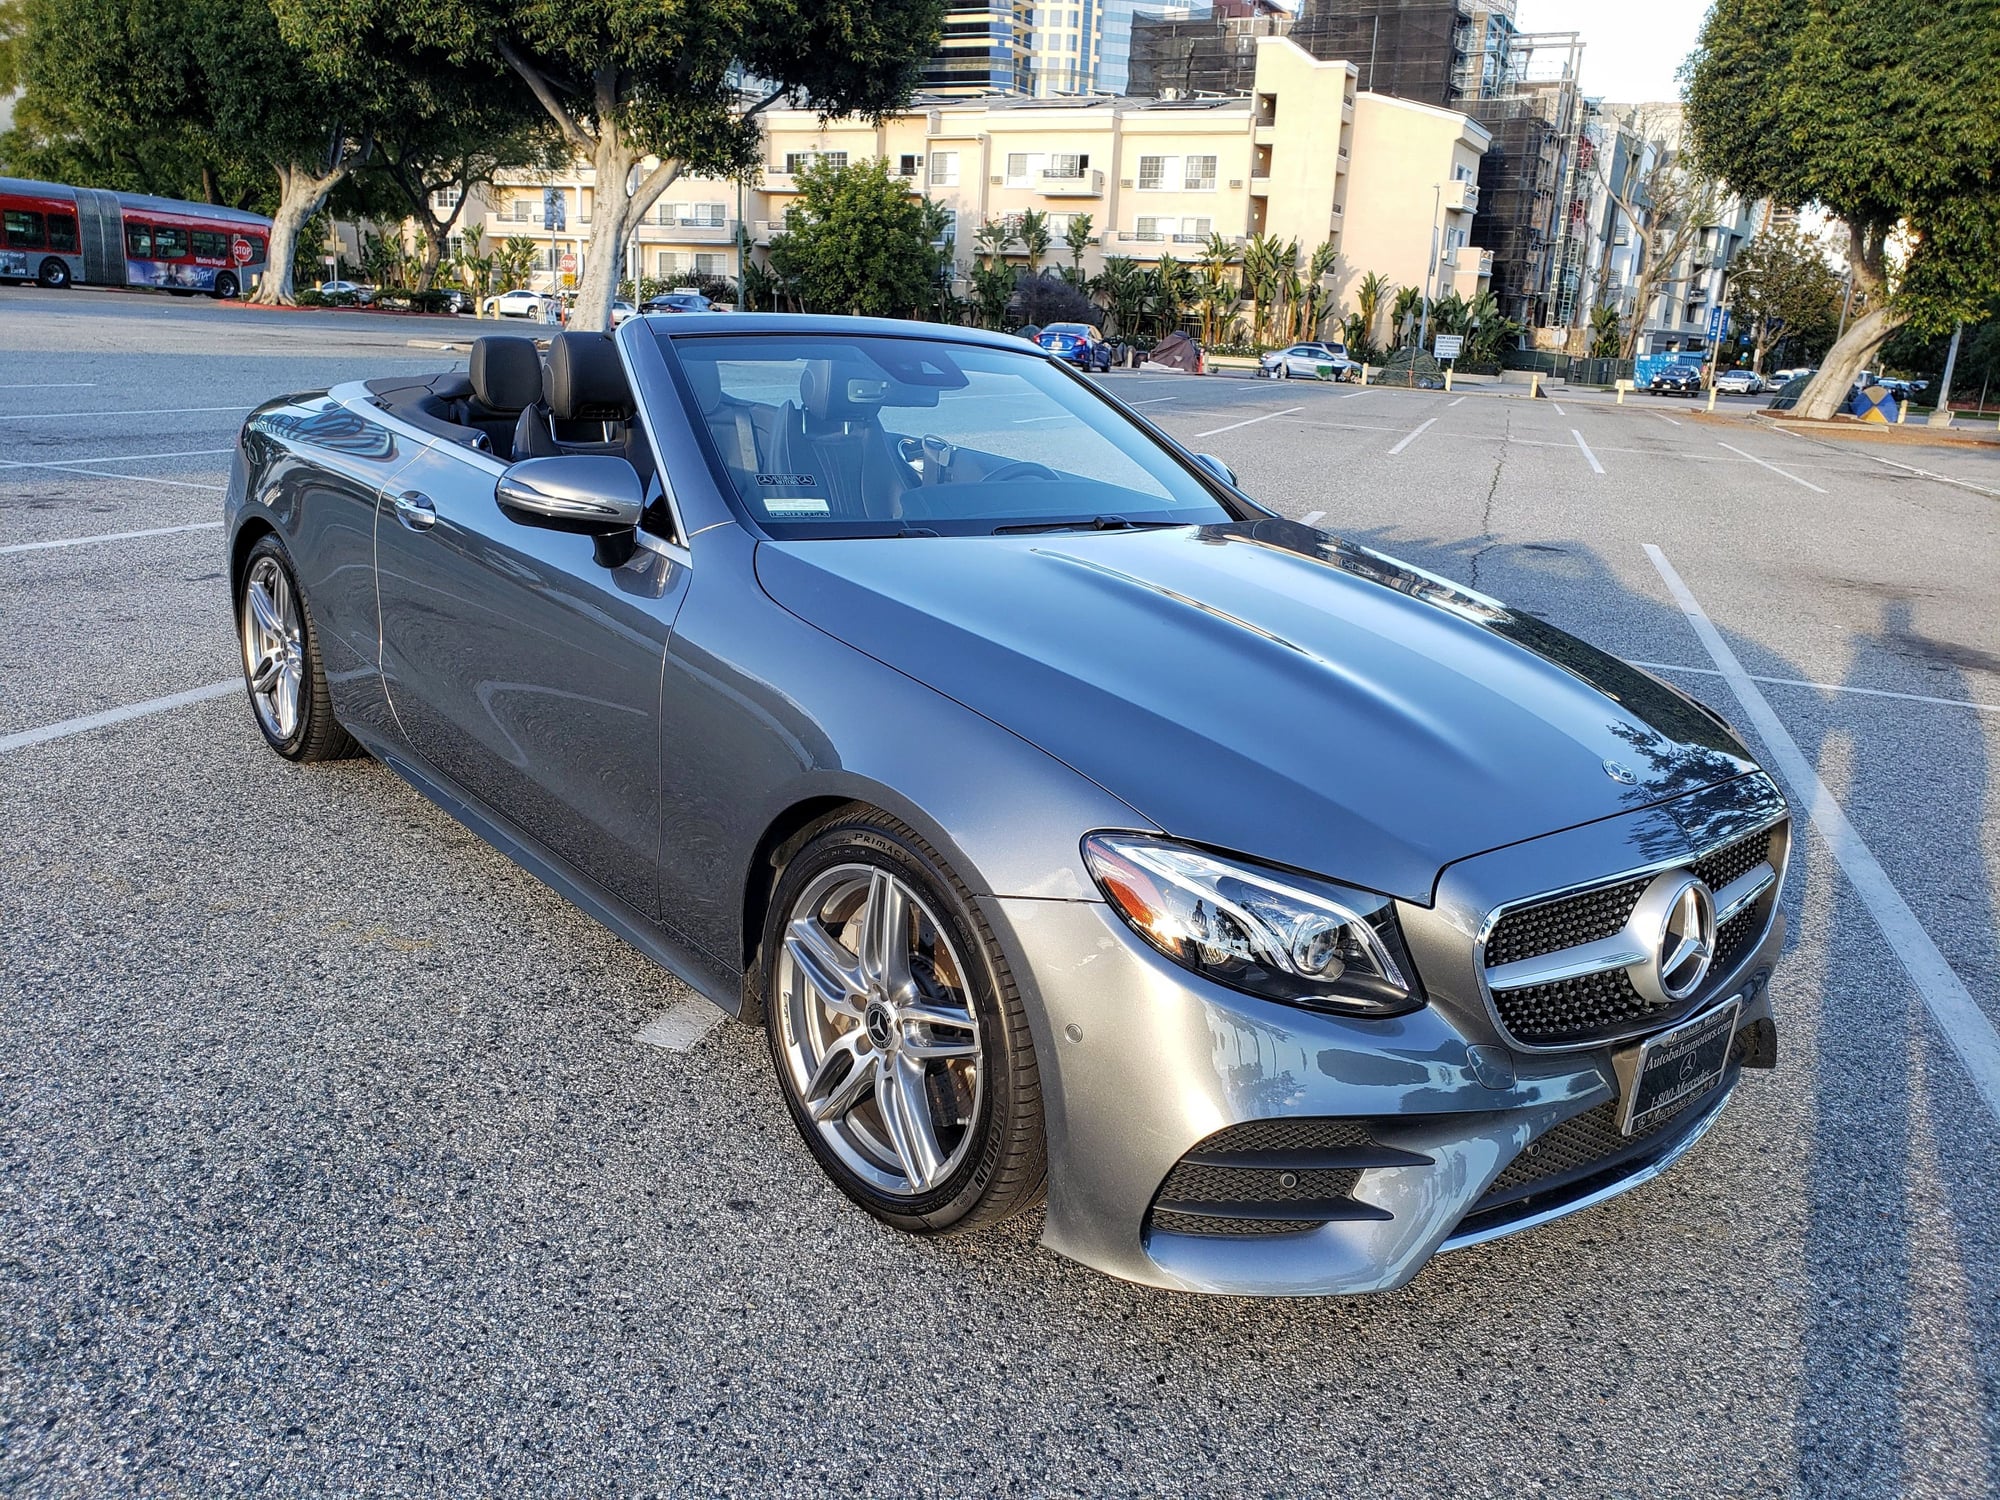 2018 Mercedes-Benz E400 - [Lease Takeover/Transfer-Socal] 2018 E400 Convert ~$80k MSRP, P2, AMG $701.99+tax p/m - Used - VIN WDD1K6FB0JF032722 - 8,100 Miles - 6 cyl - 2WD - Automatic - Convertible - Gray - Los Angeles, CA 90024, United States